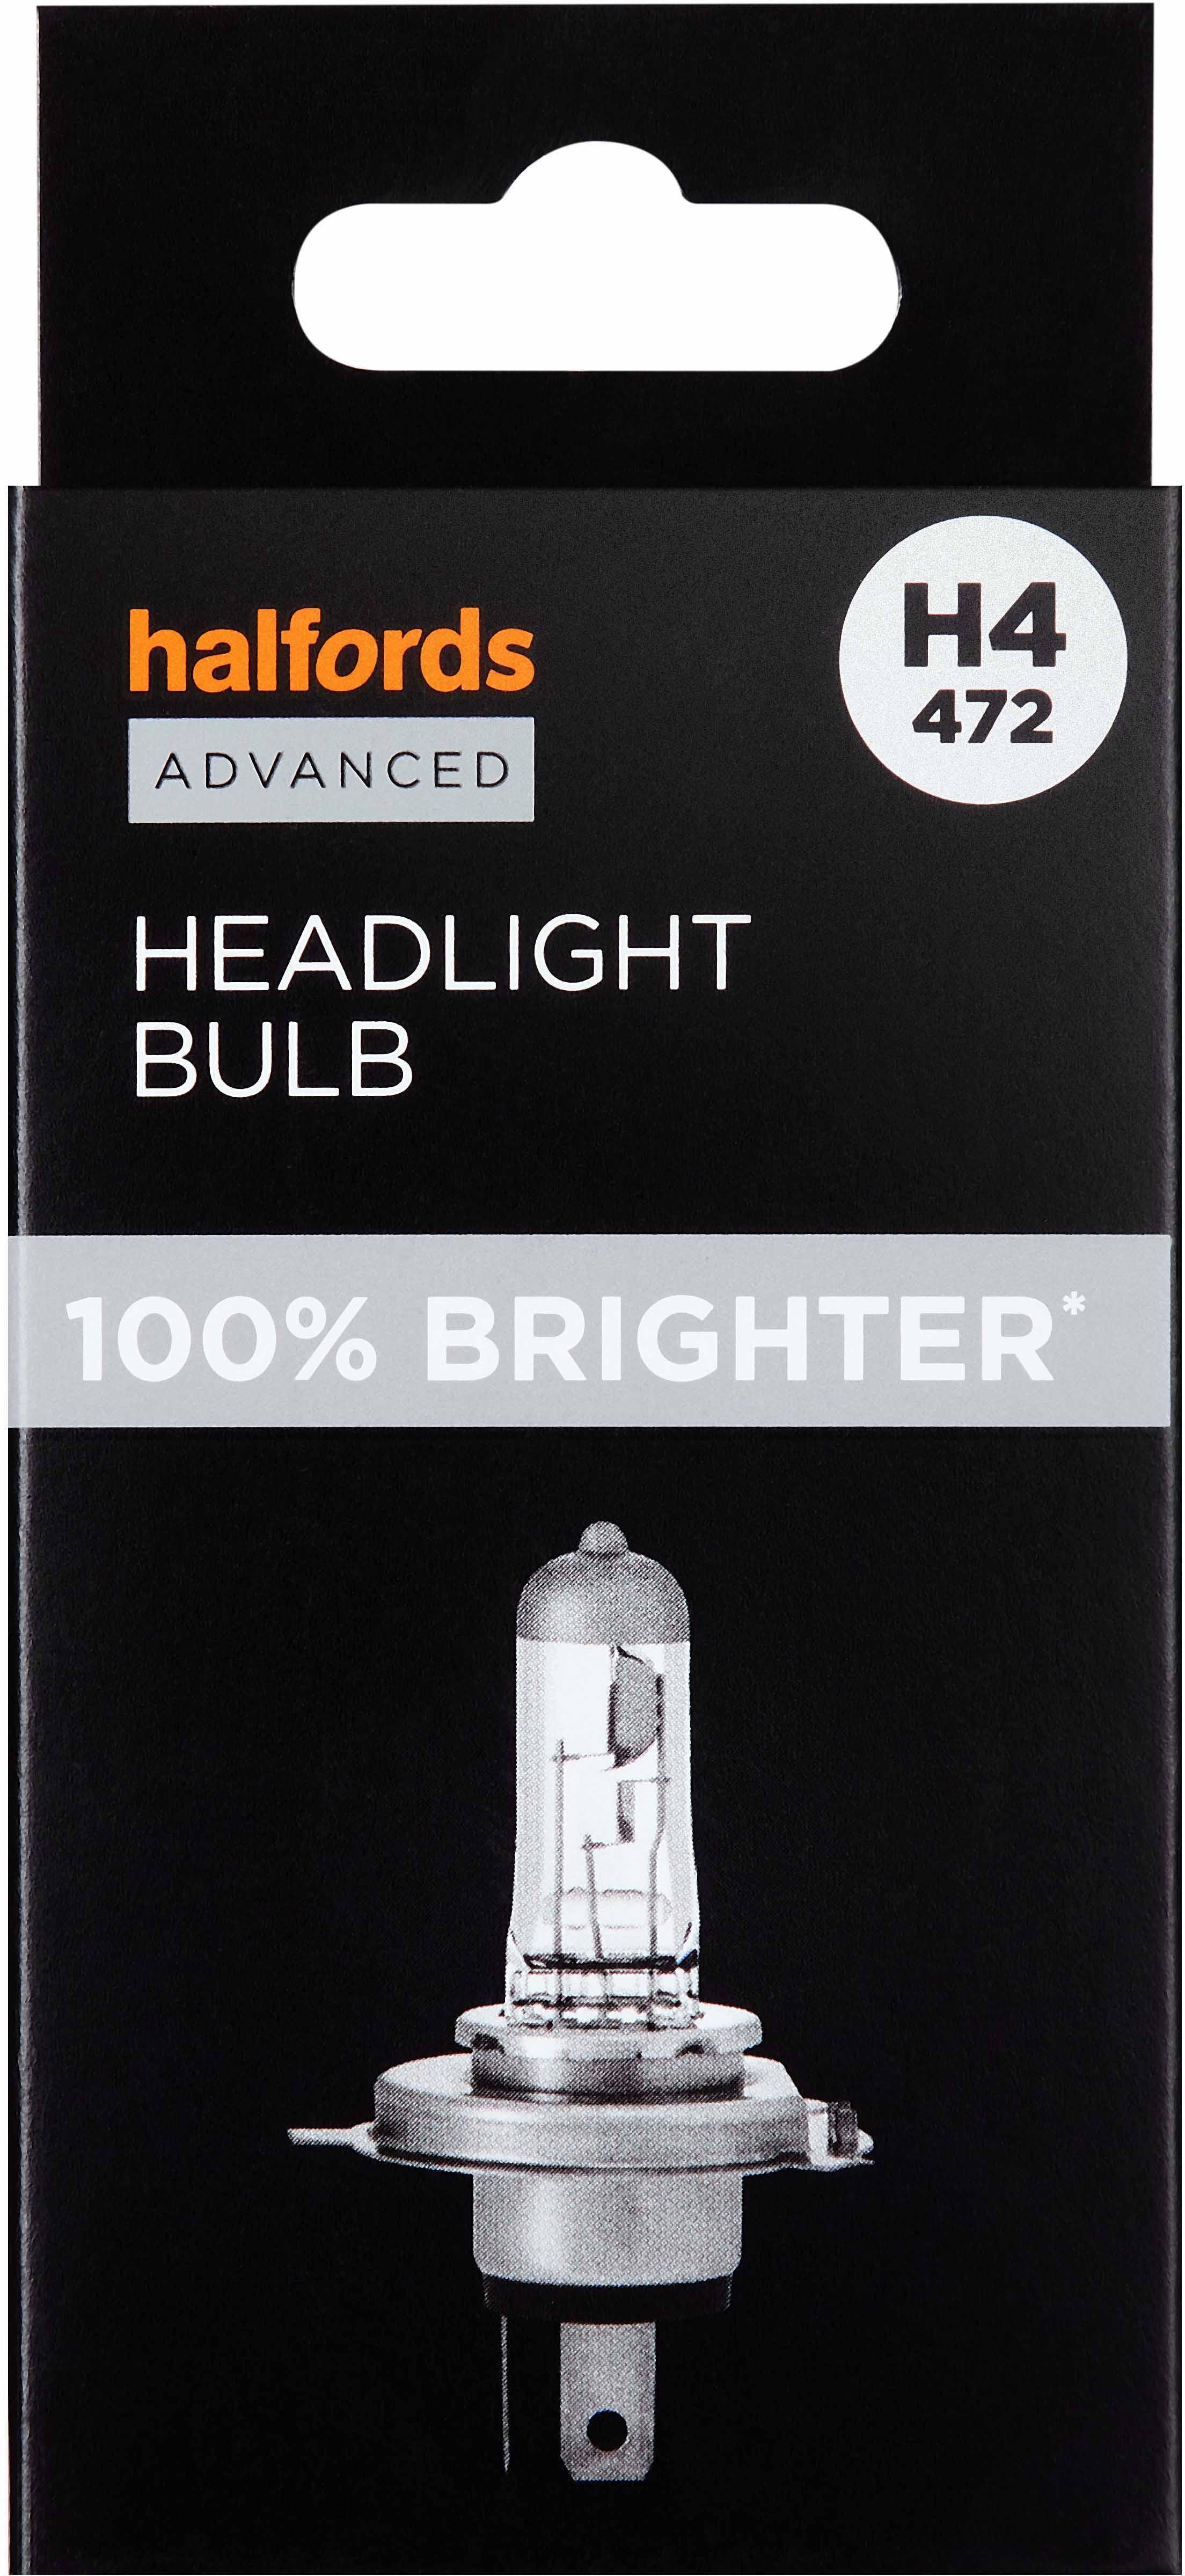 H4 472 Car Headlight Bulb Halfords Advanced Up To +100 Percent Brighter Single Pack